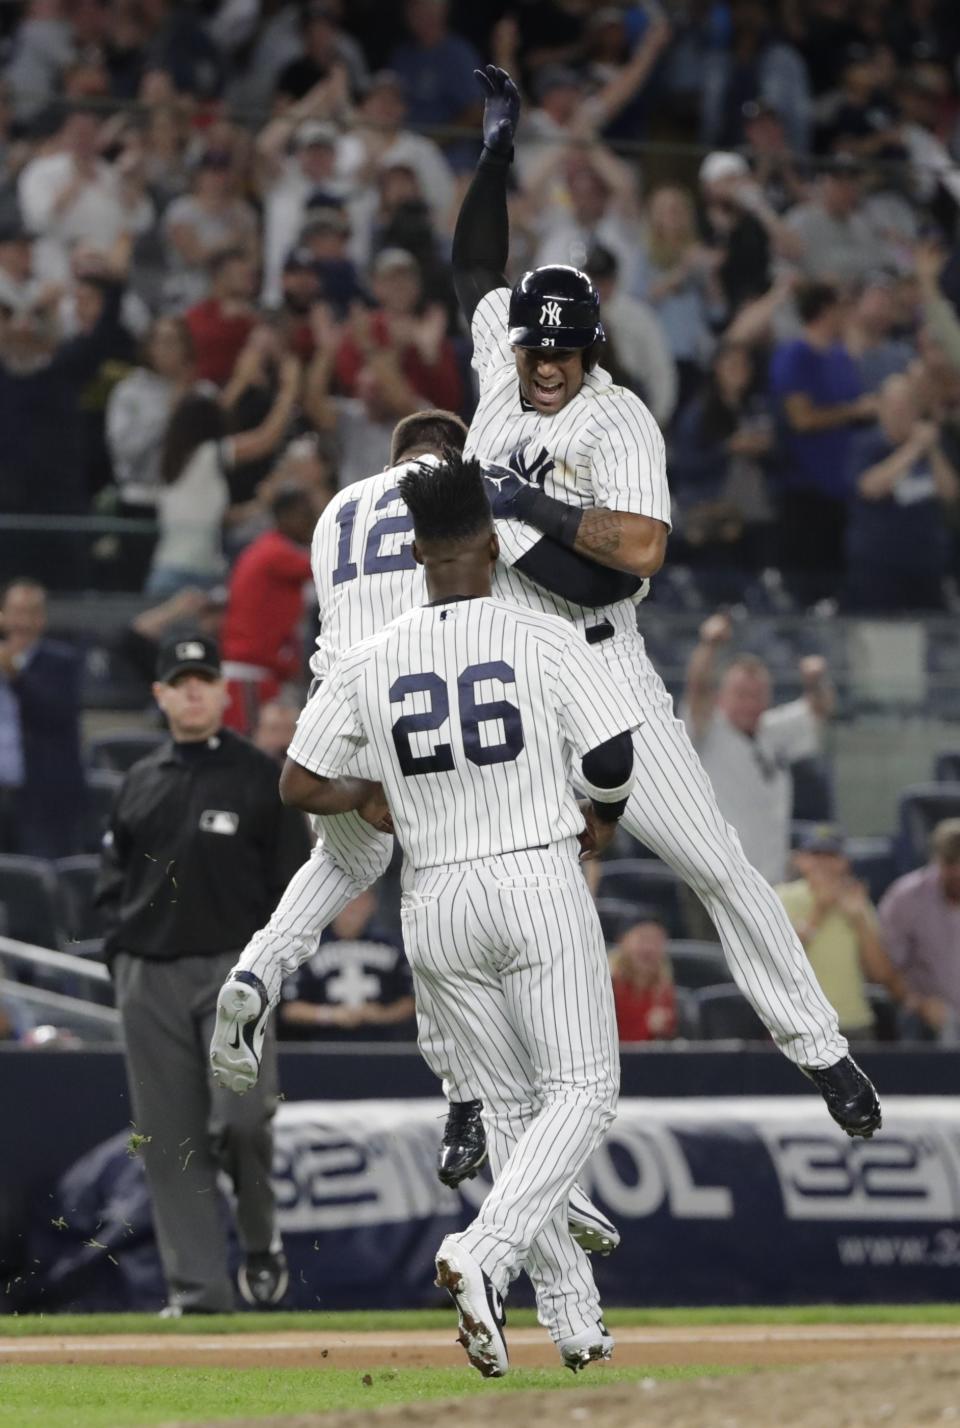 New York Yankees' Aaron Hicks celebrates with teammates Tyler Wade (12) and Andrew McCutchen (26) after hitting an RBI double during the eleventh inning of a baseball game against the Baltimore Orioles Saturday, Sept. 22, 2018, in New York. The Yankees won 3-2. (AP Photo/Frank Franklin II)